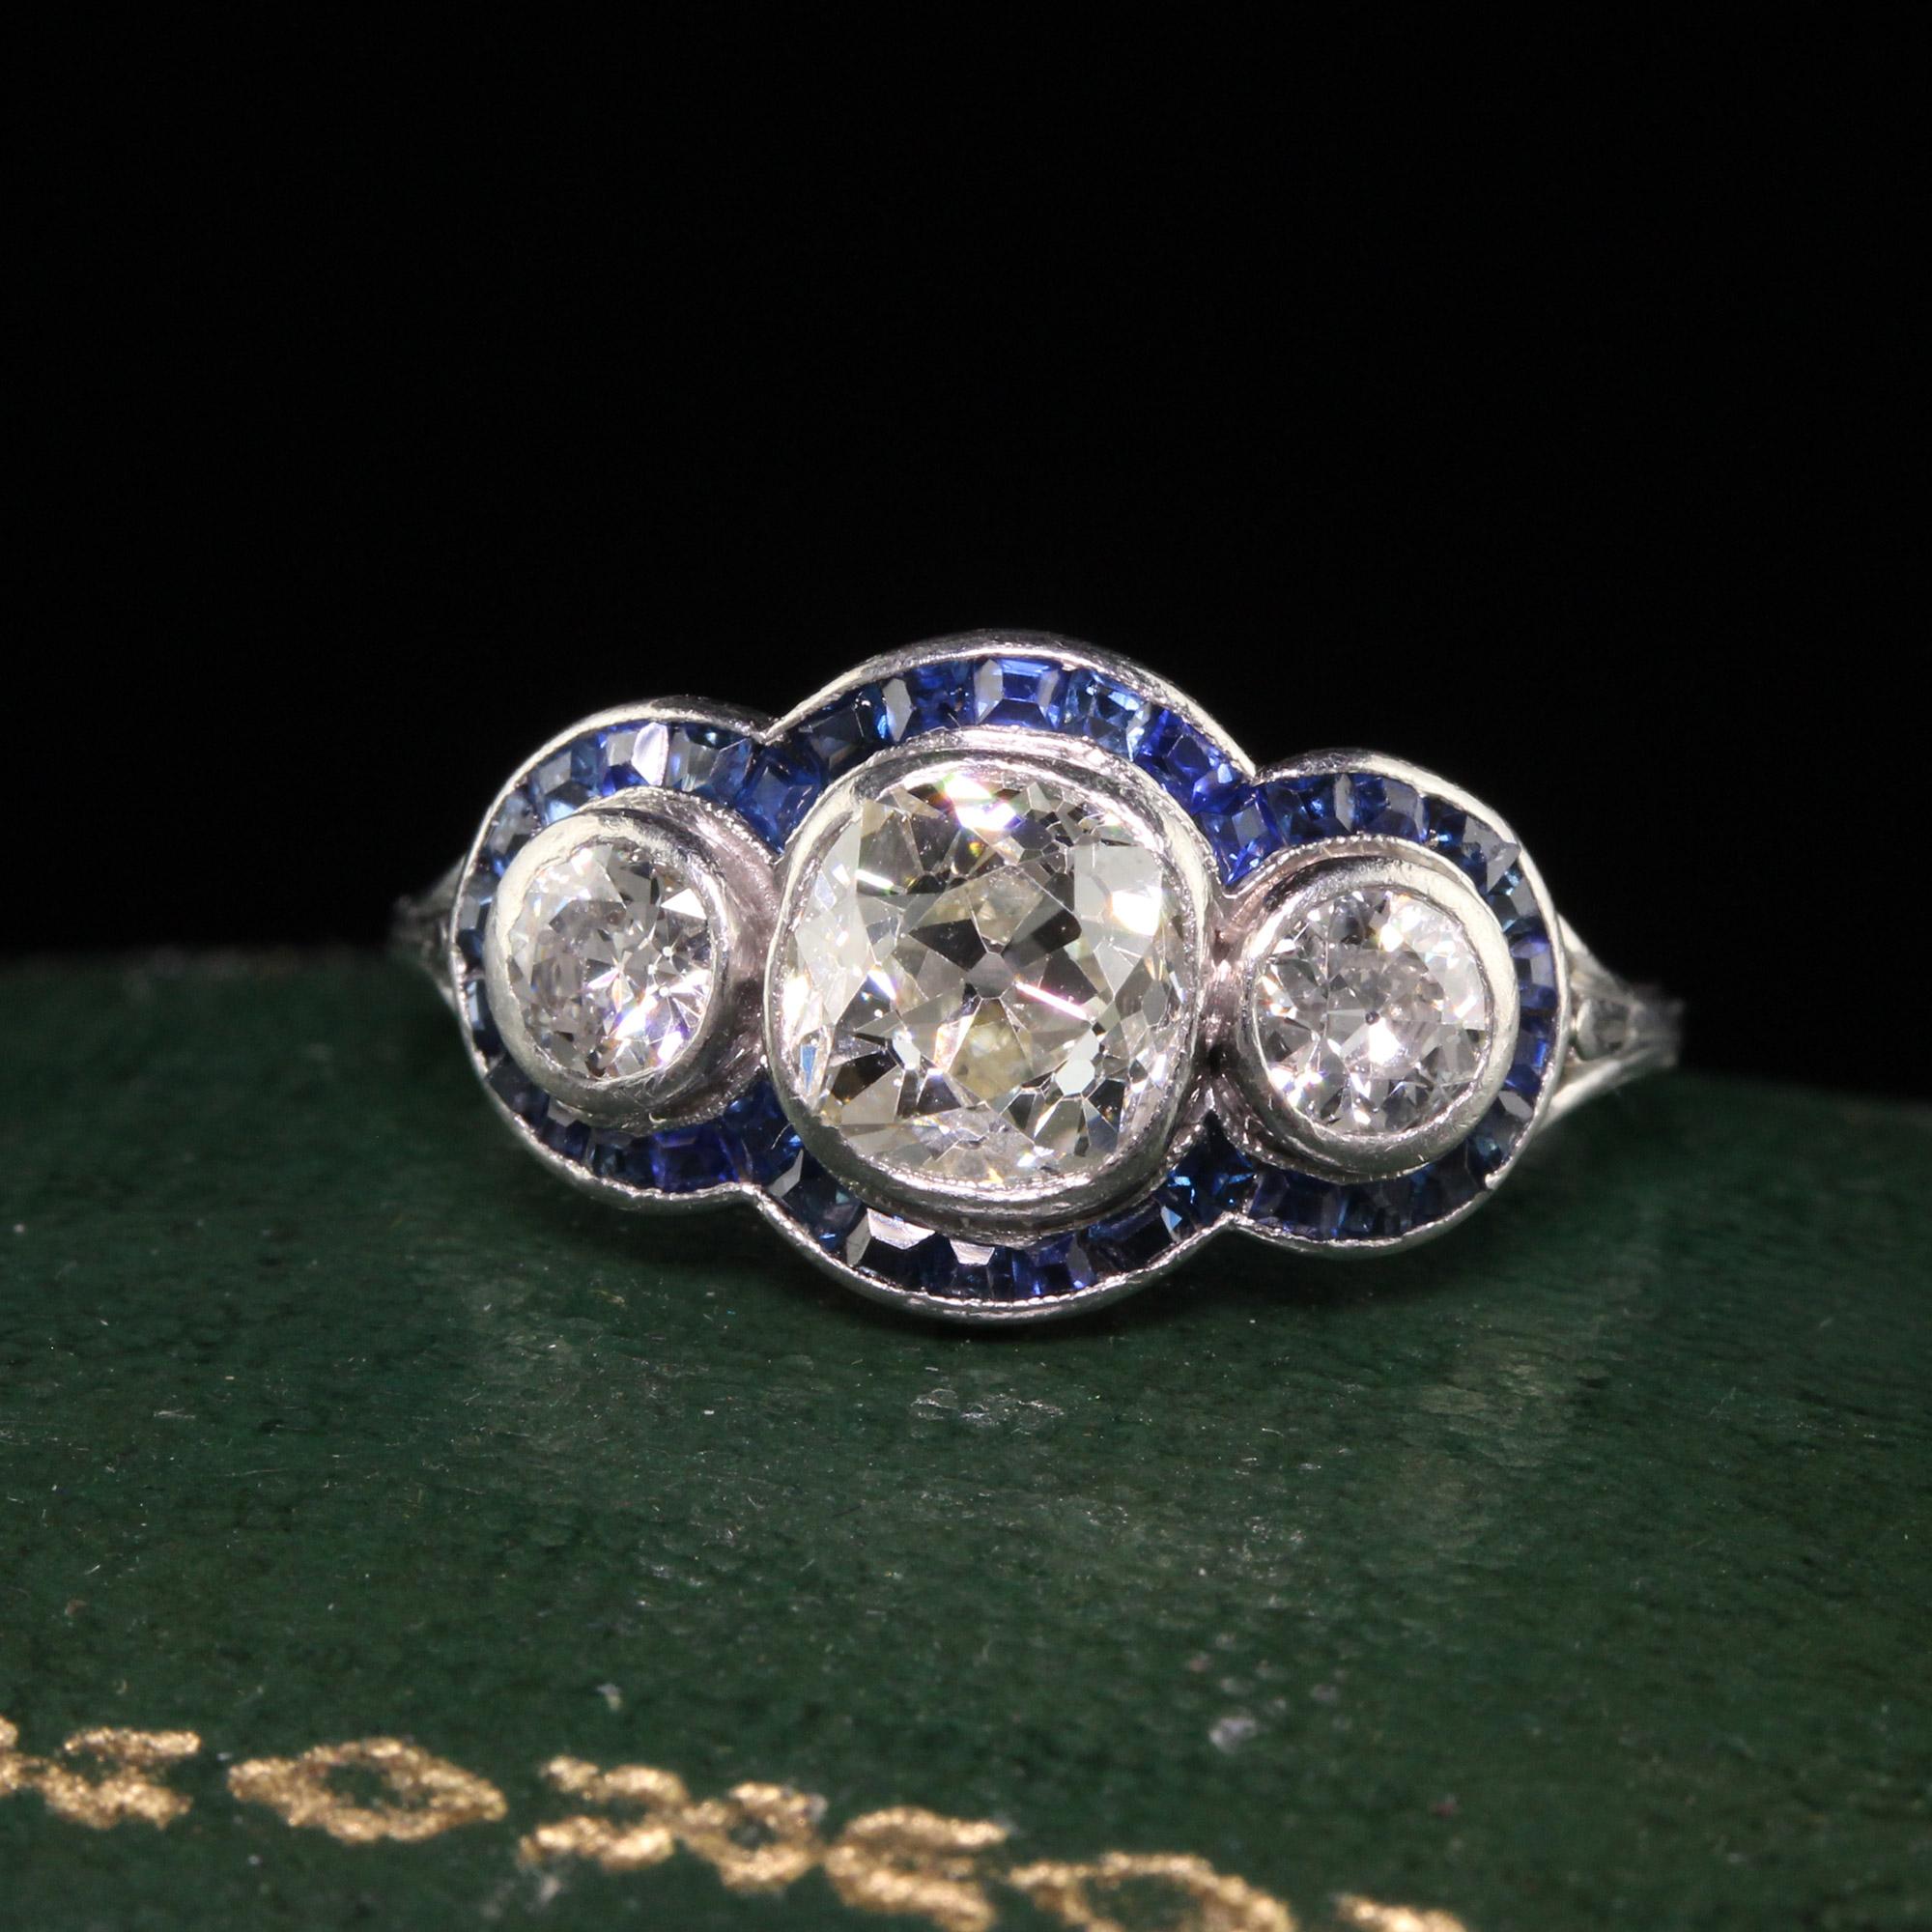 Beautiful Antique Art Deco Platinum Old Mine Diamond and Sapphire Three Stone Ring. This gorgeous three stone ring is crafted in platinum. The center holds an old mine cut diamonds and has two old european cut diamonds on its sides. There are